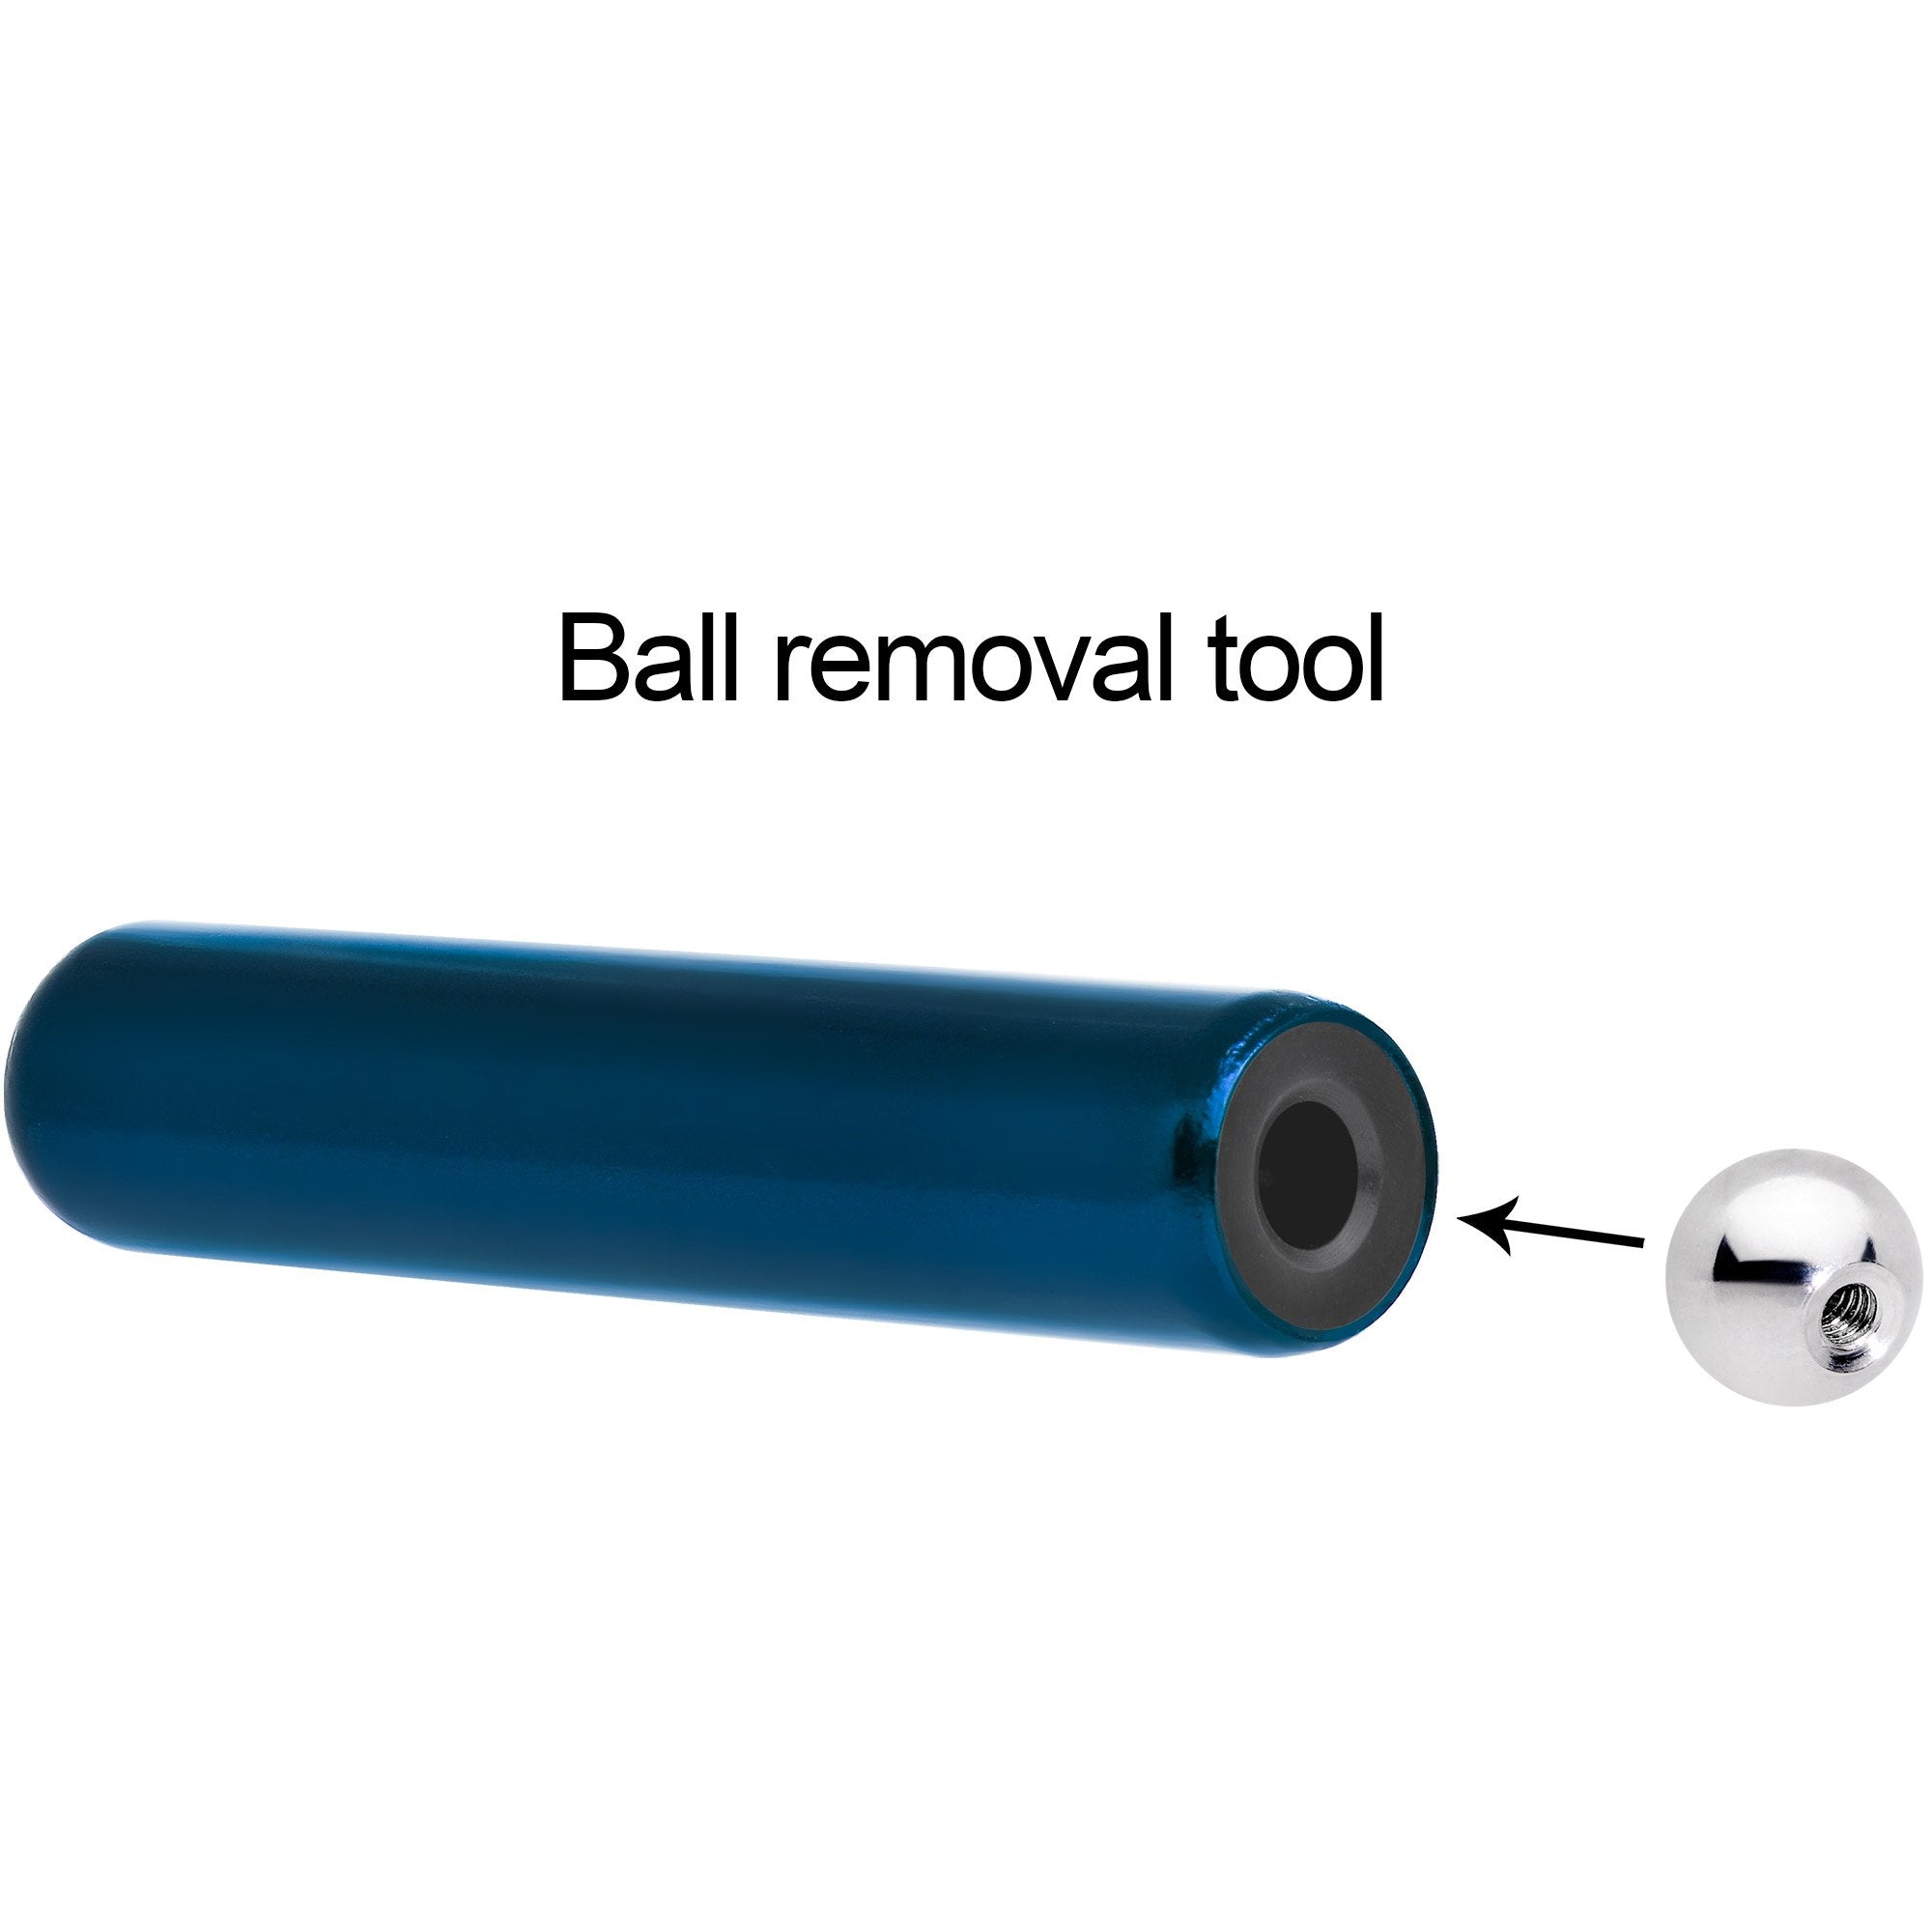 Body Piercing Ball Removal Tool – NEW!